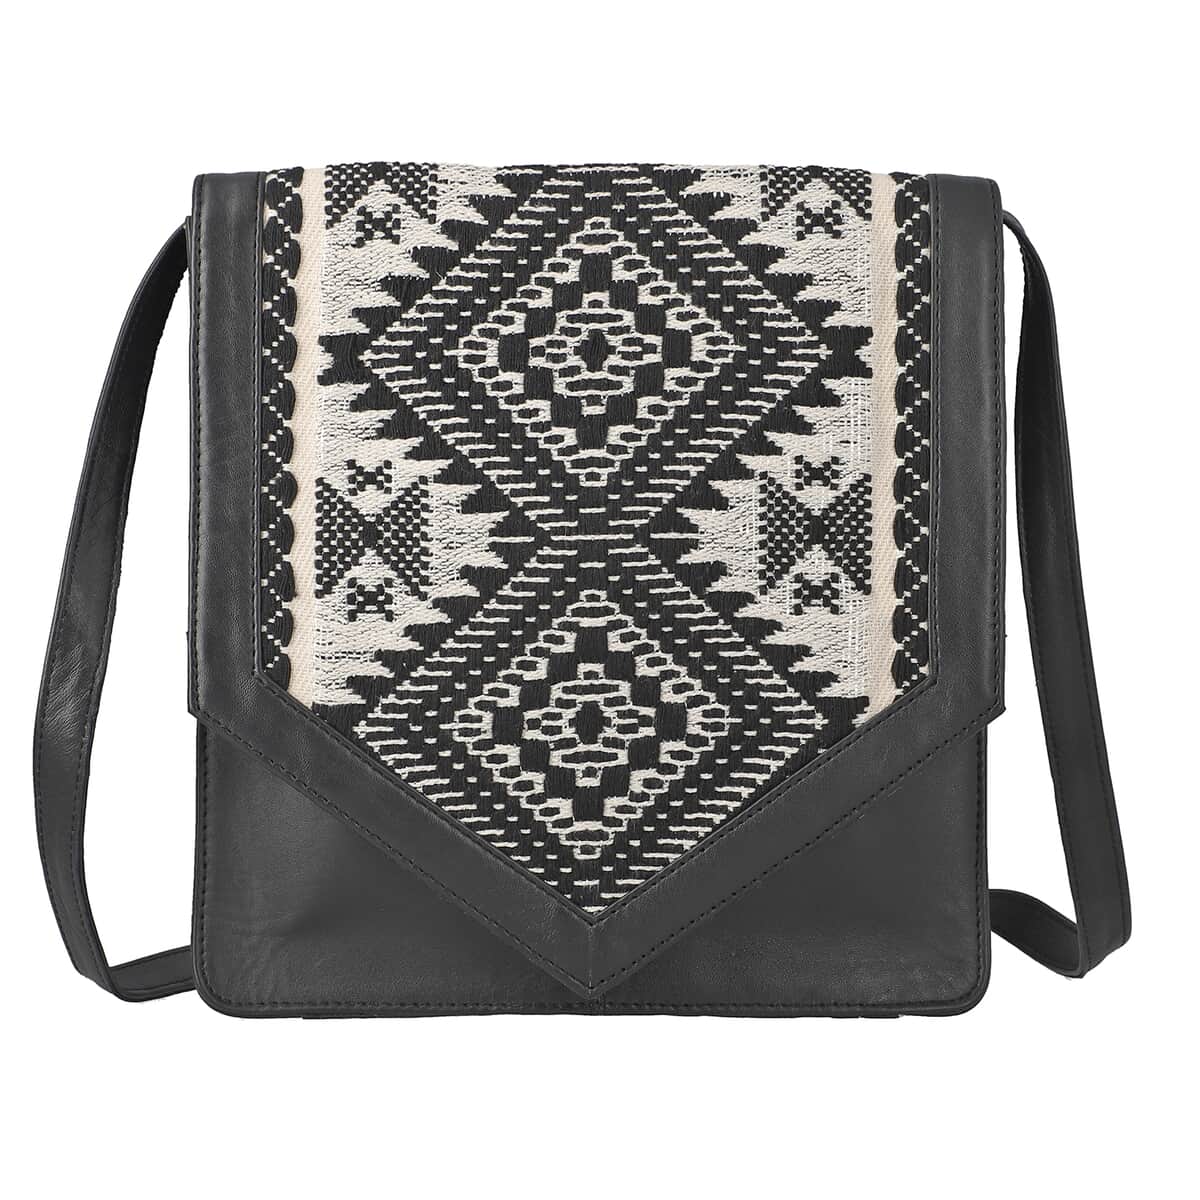 Black Genuine Leather Embroidery Crossbody Bag (9.5"x10.5"X2") image number 0